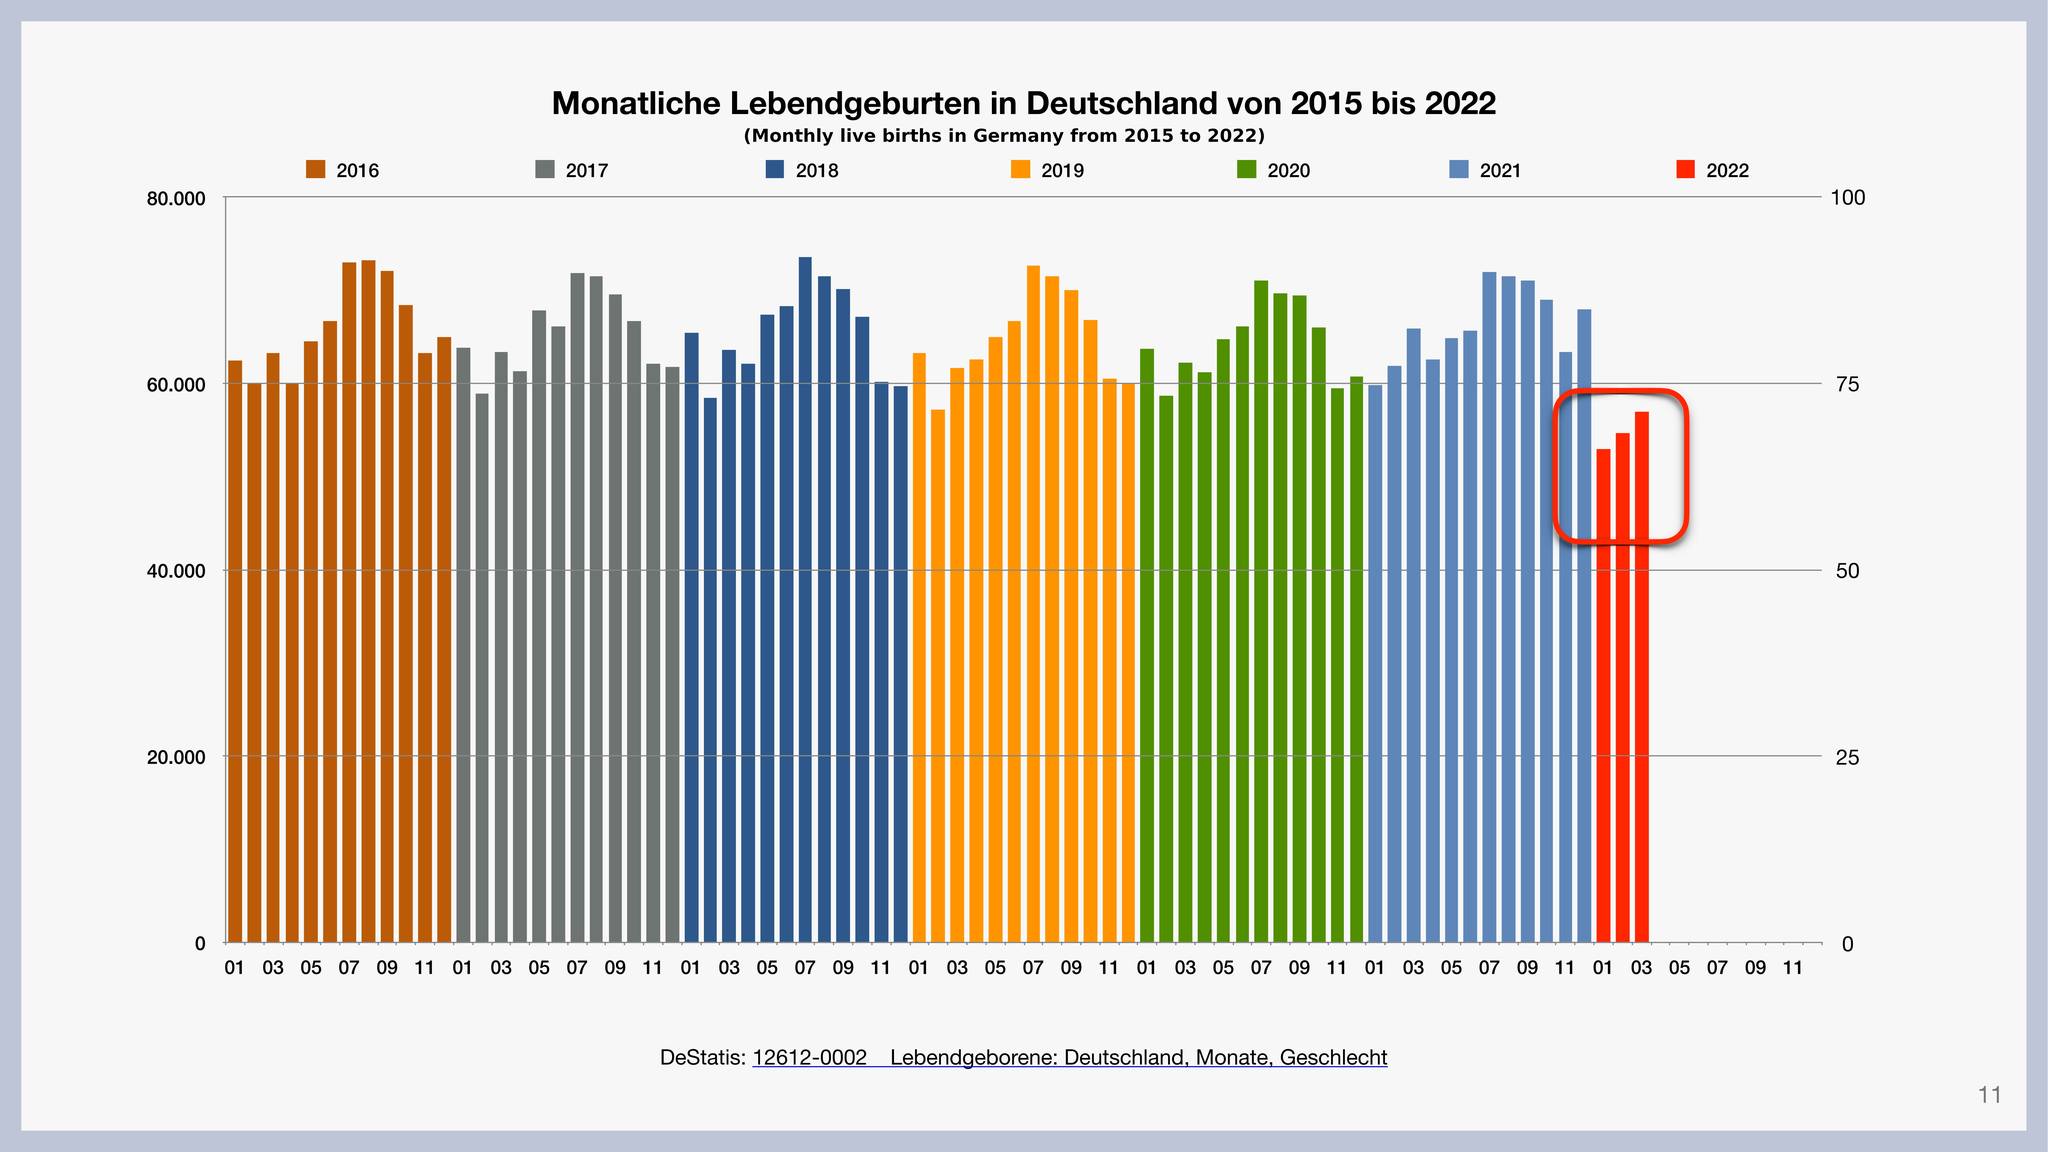 Monthly live births in Switzerland from 2016 to 2022...